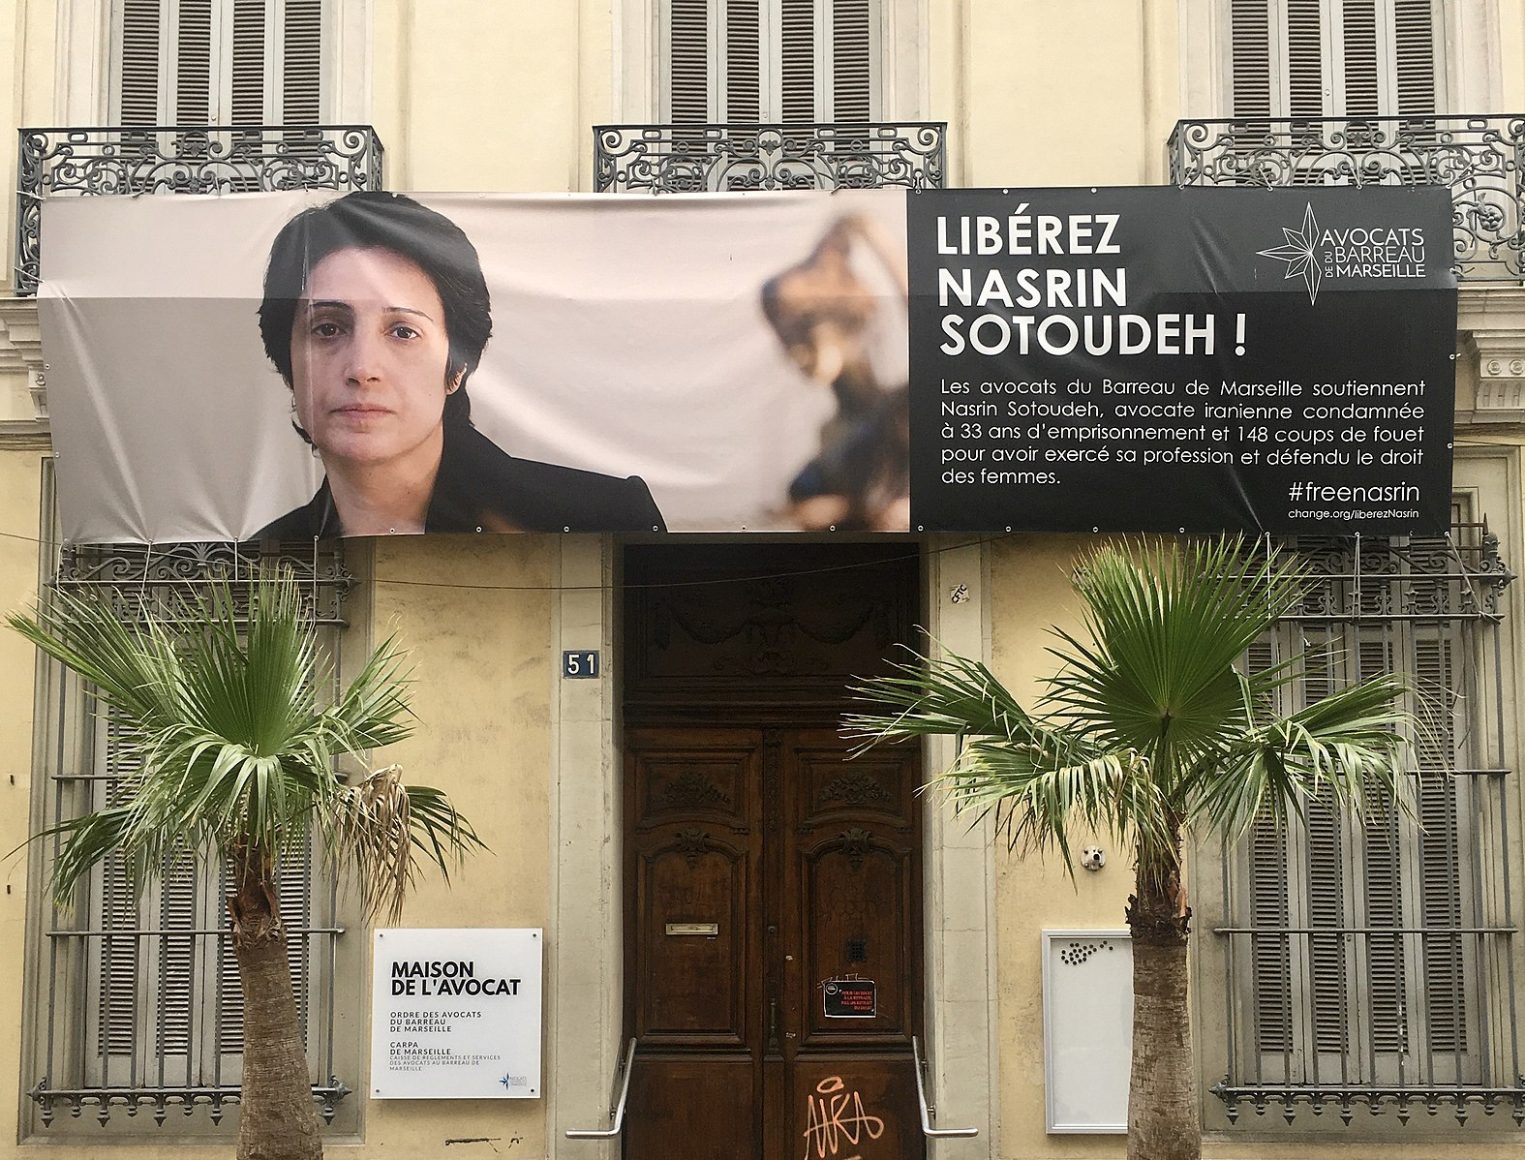 A poster in support of Iranian women's rights activist Nasrin Sotoudeh and demanding her release hangs on a building in Marseille, France